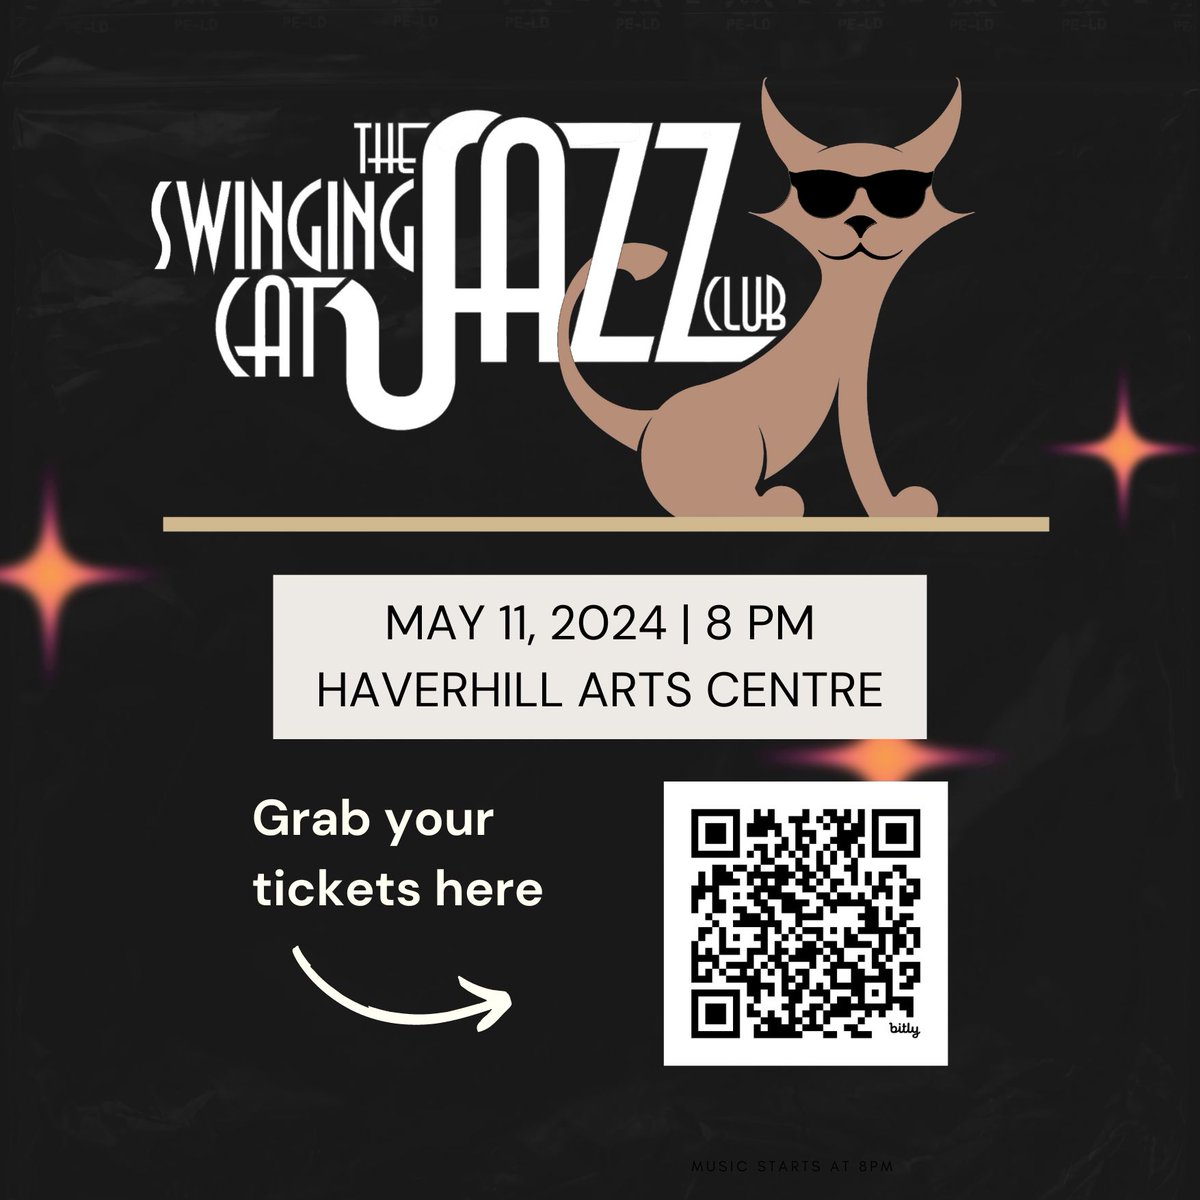 Get ready for an unforgettable night of jazz magic! 🌟 Join my quartet, alongside the sensational Ray Gelato at 'The Swinging Cat' Jazz Club, Haverhill Arts Centre on May 11, 2024, at 8 PM. 🎉 Happening in 10 days time! Secure your tickets now: buff.ly/3LbBOc6 🎟️